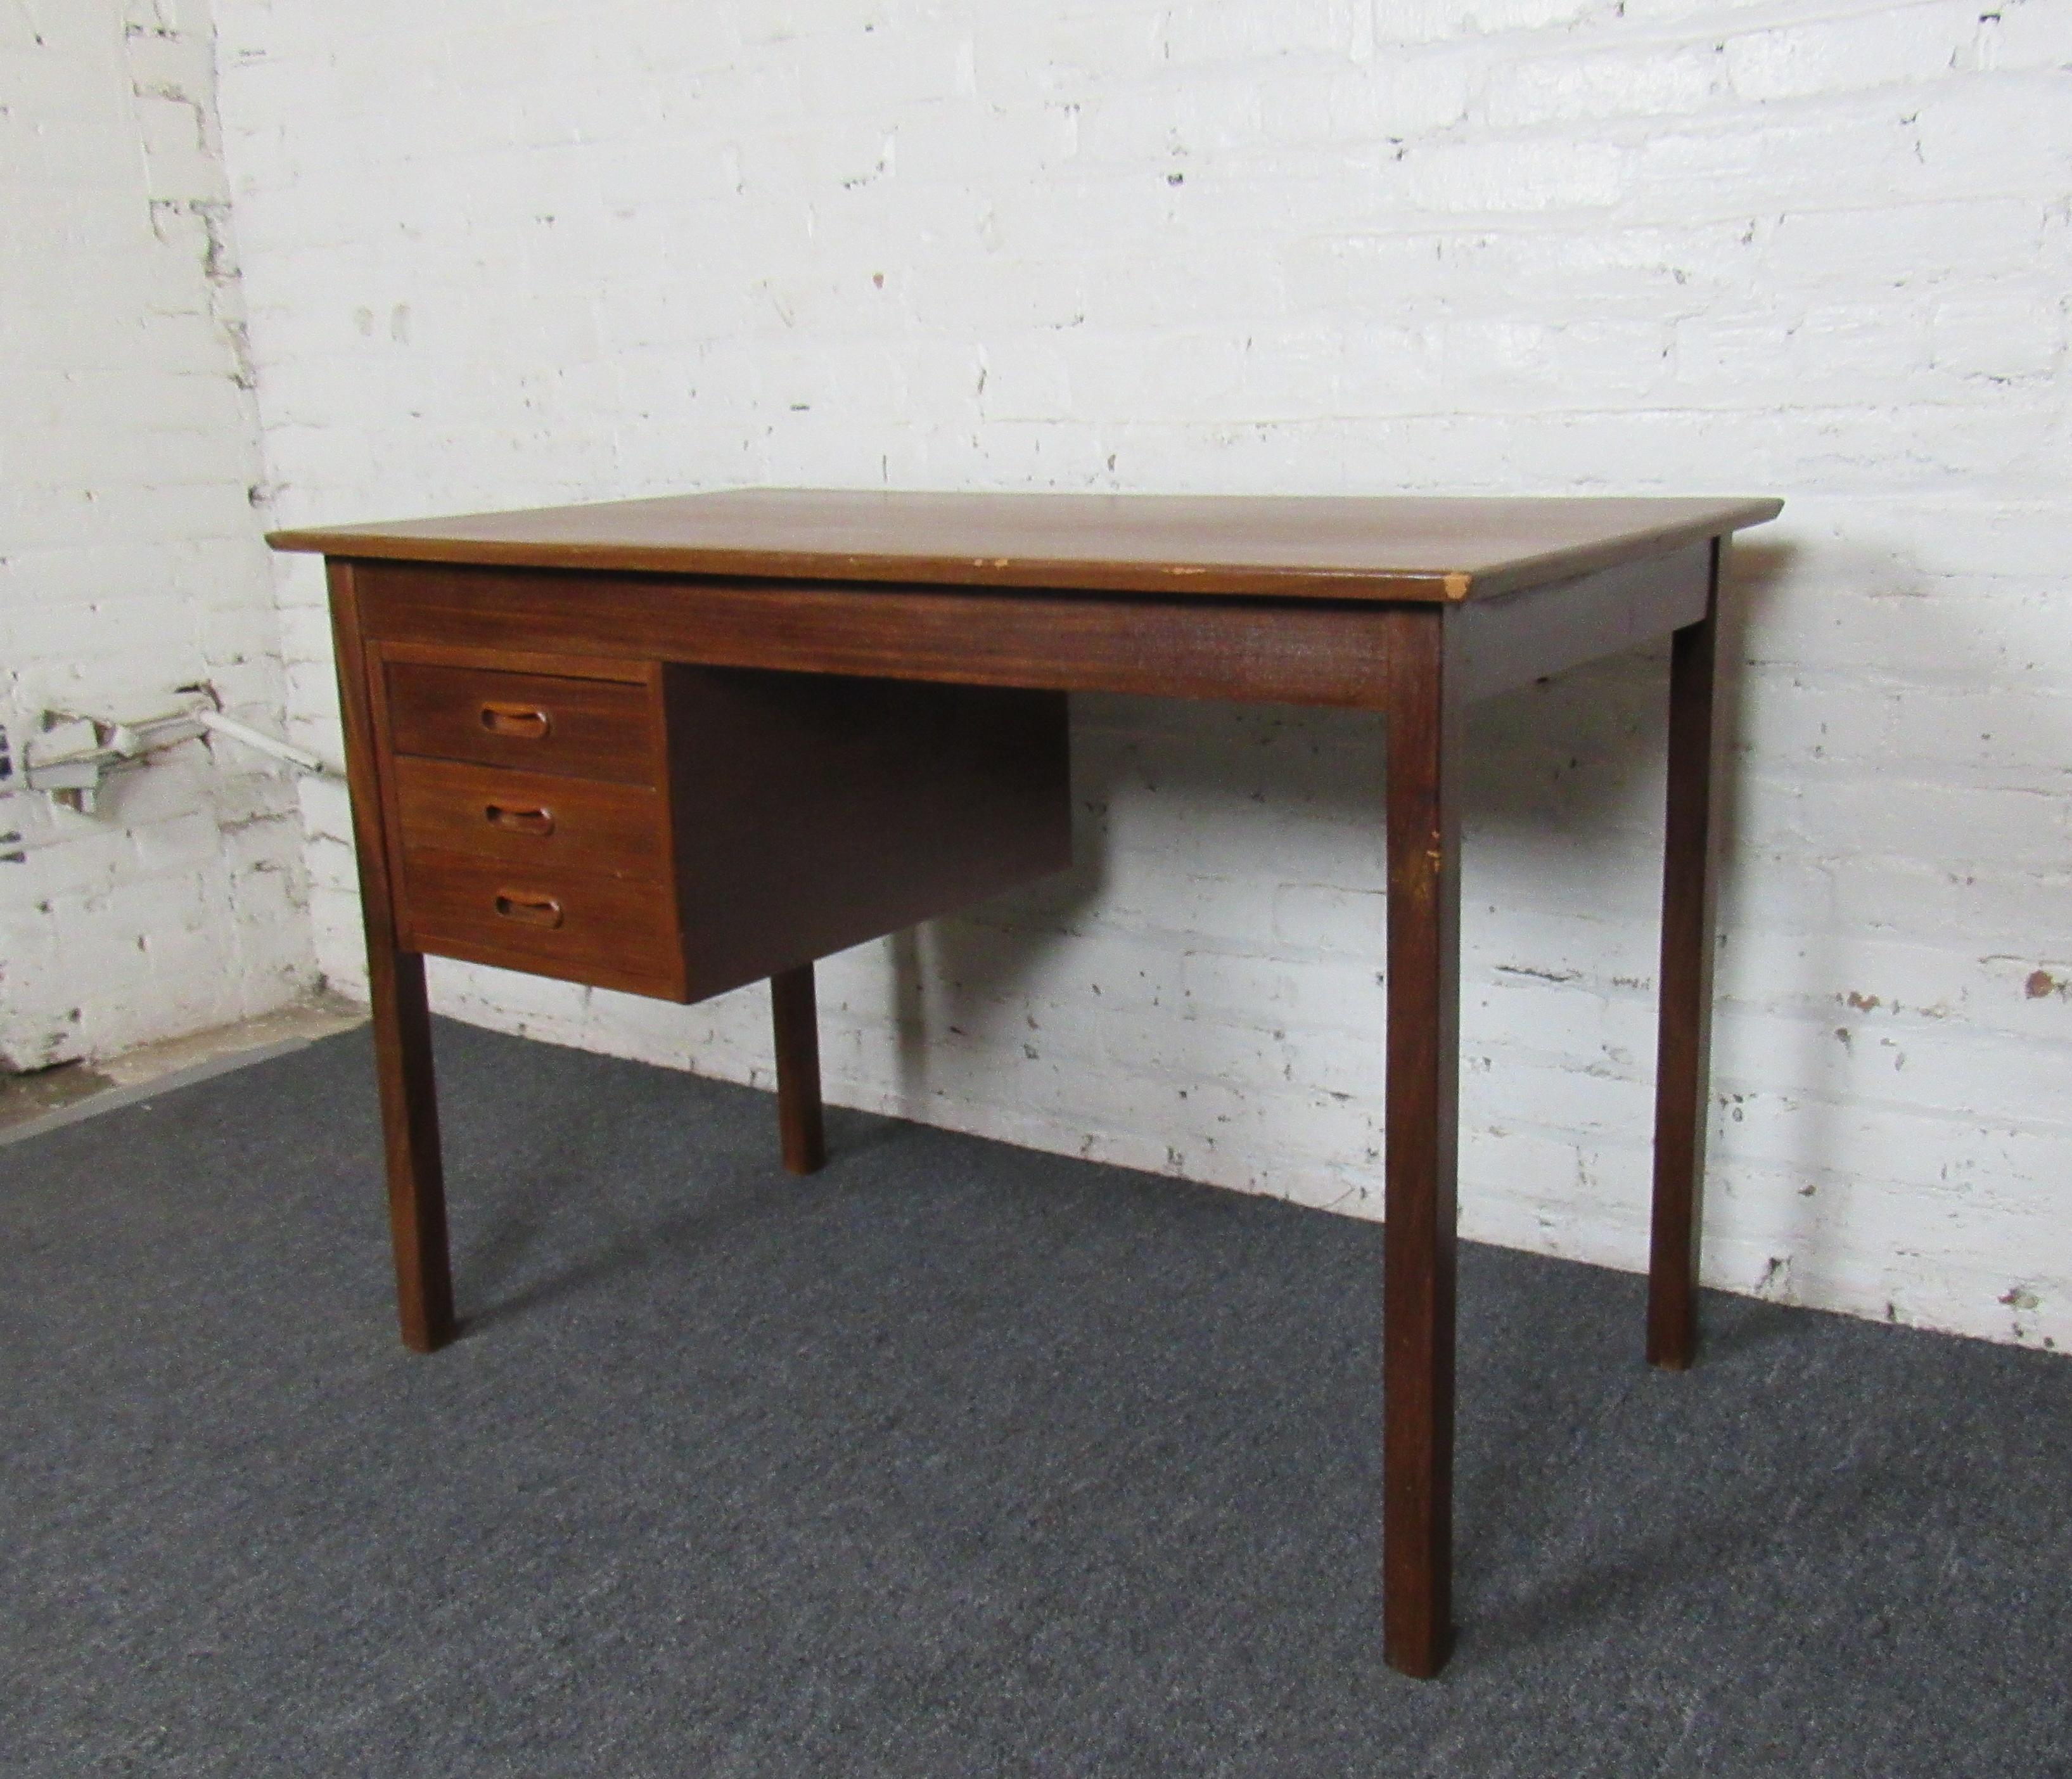 This vintage writing desk combines sturdy Mid-Century Modern quality with simple elegance. With three drawers for storage, this desk is perfect for adding tasteful style to a home office or business. Please confirm the item location (NY or